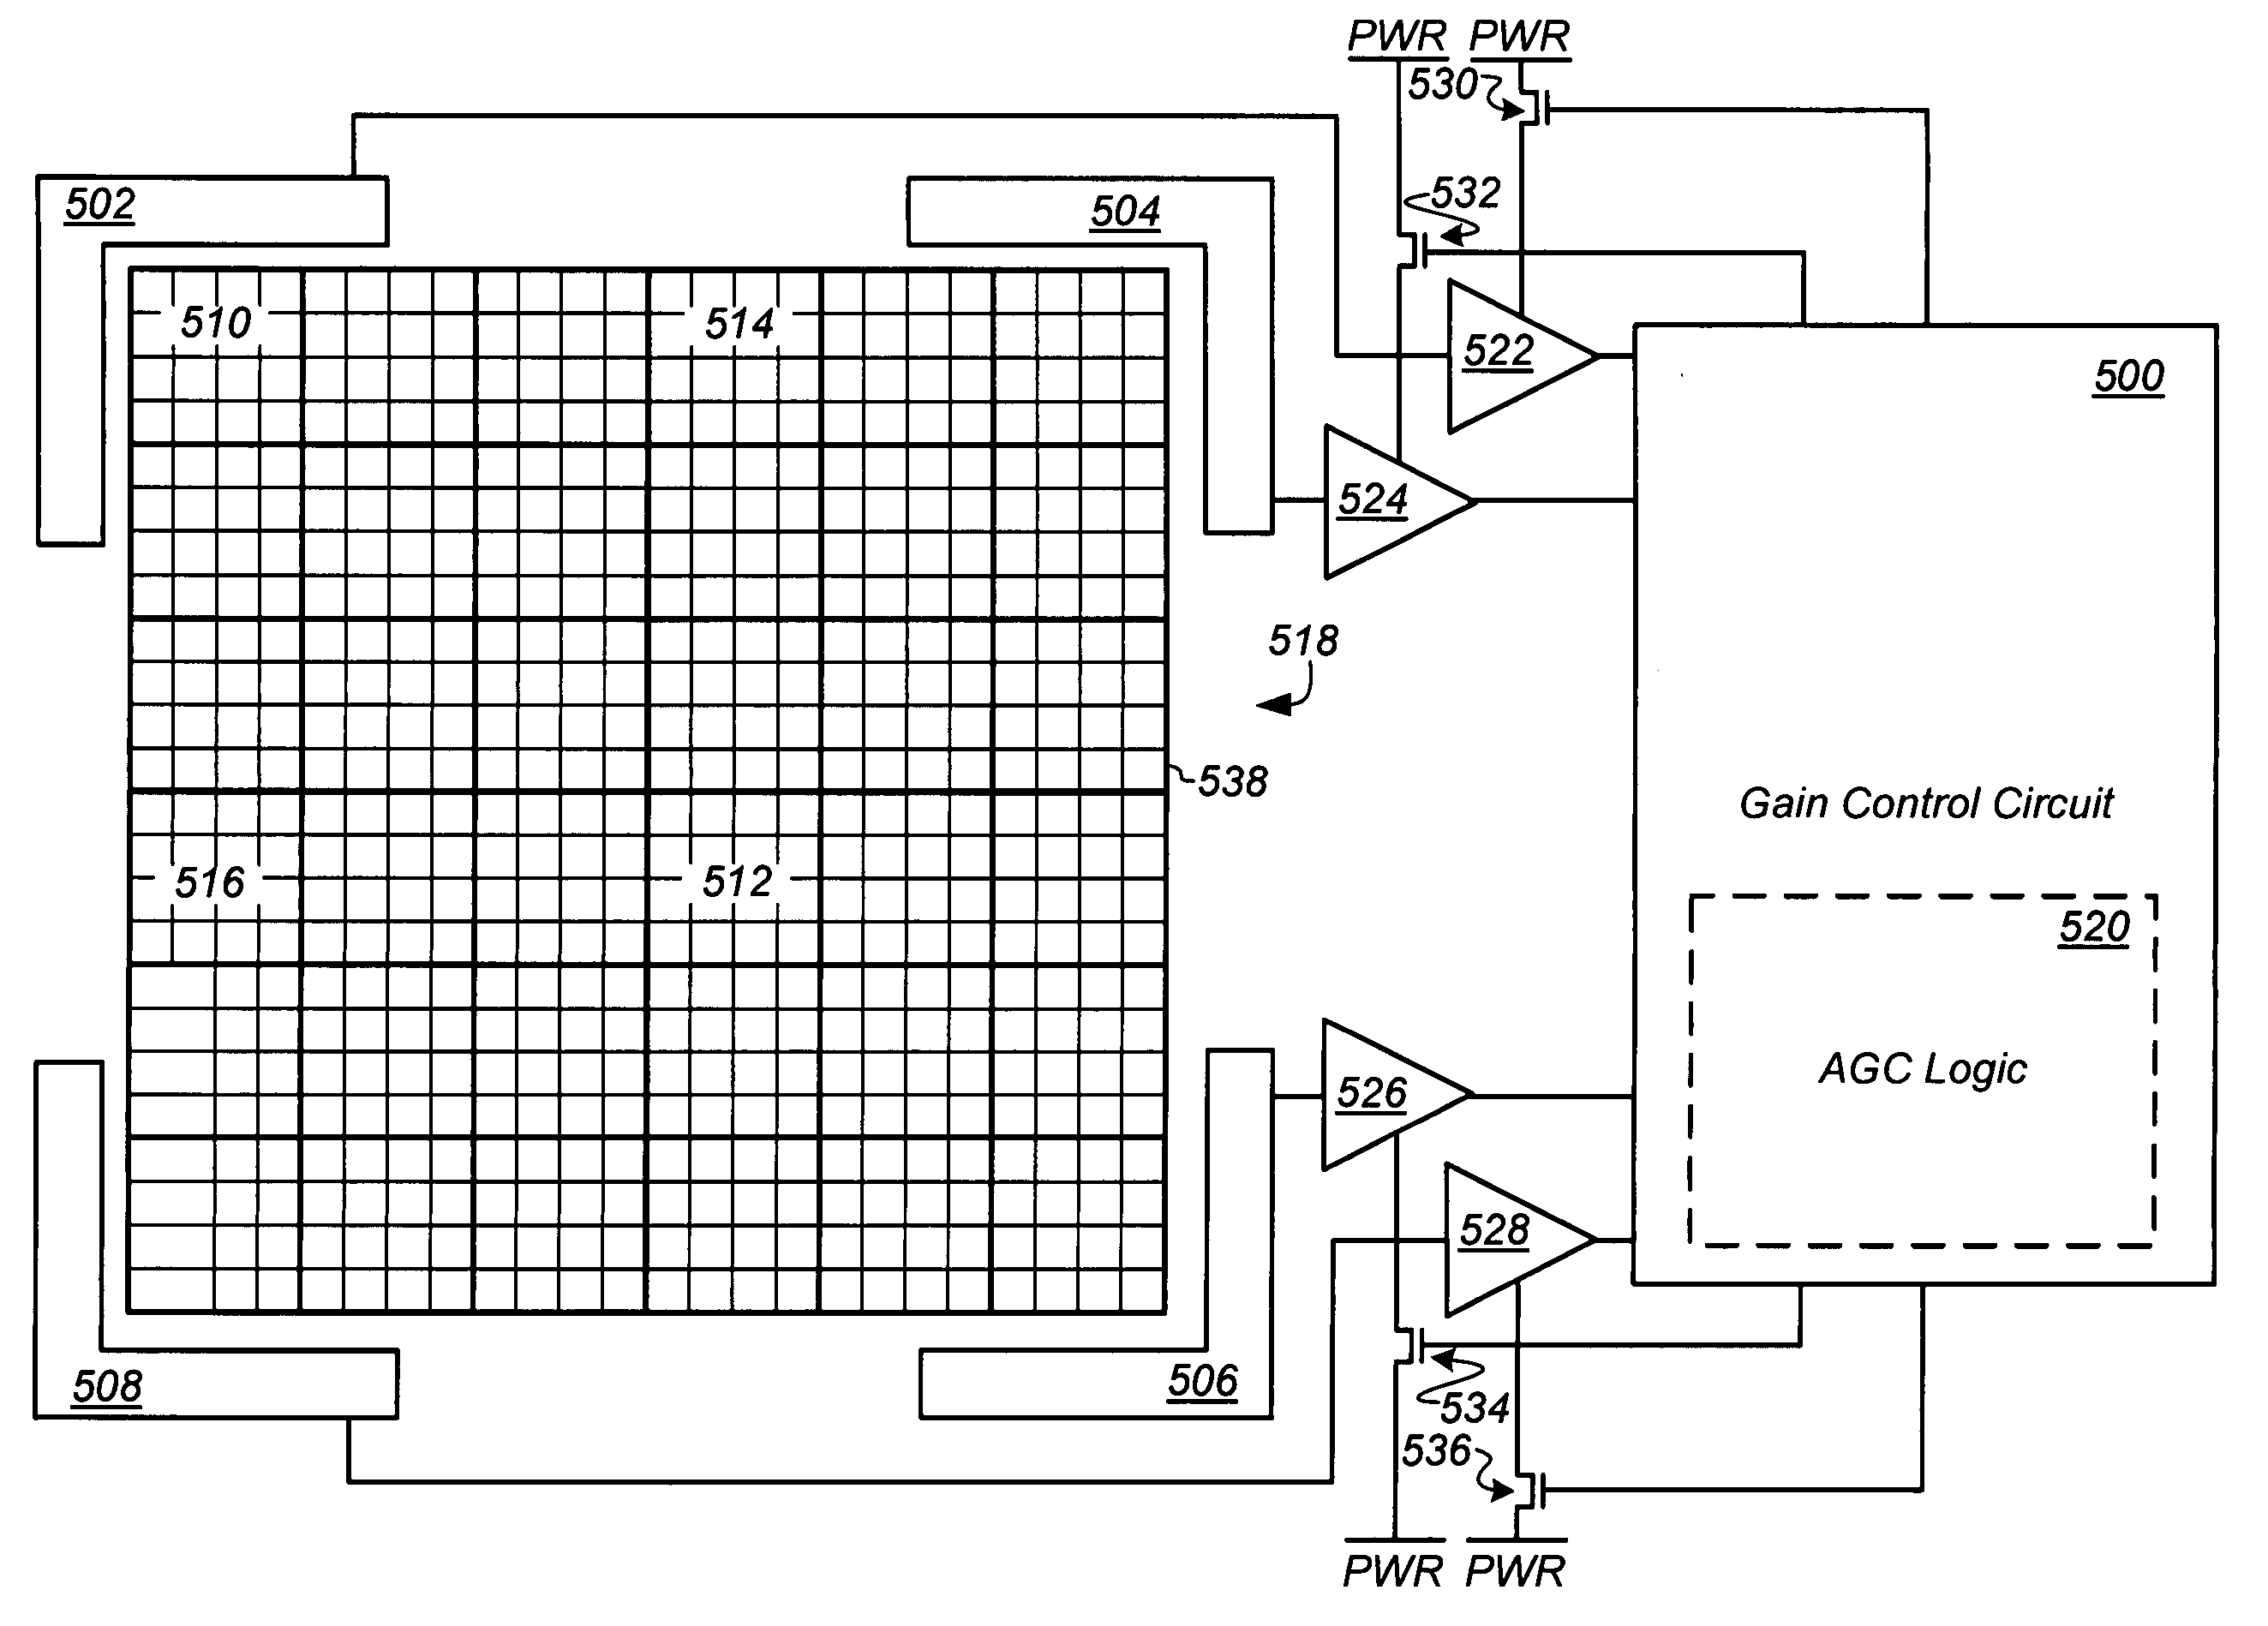 Circuit and method for reducing power consumption in an optical navigation system having redundant arrays